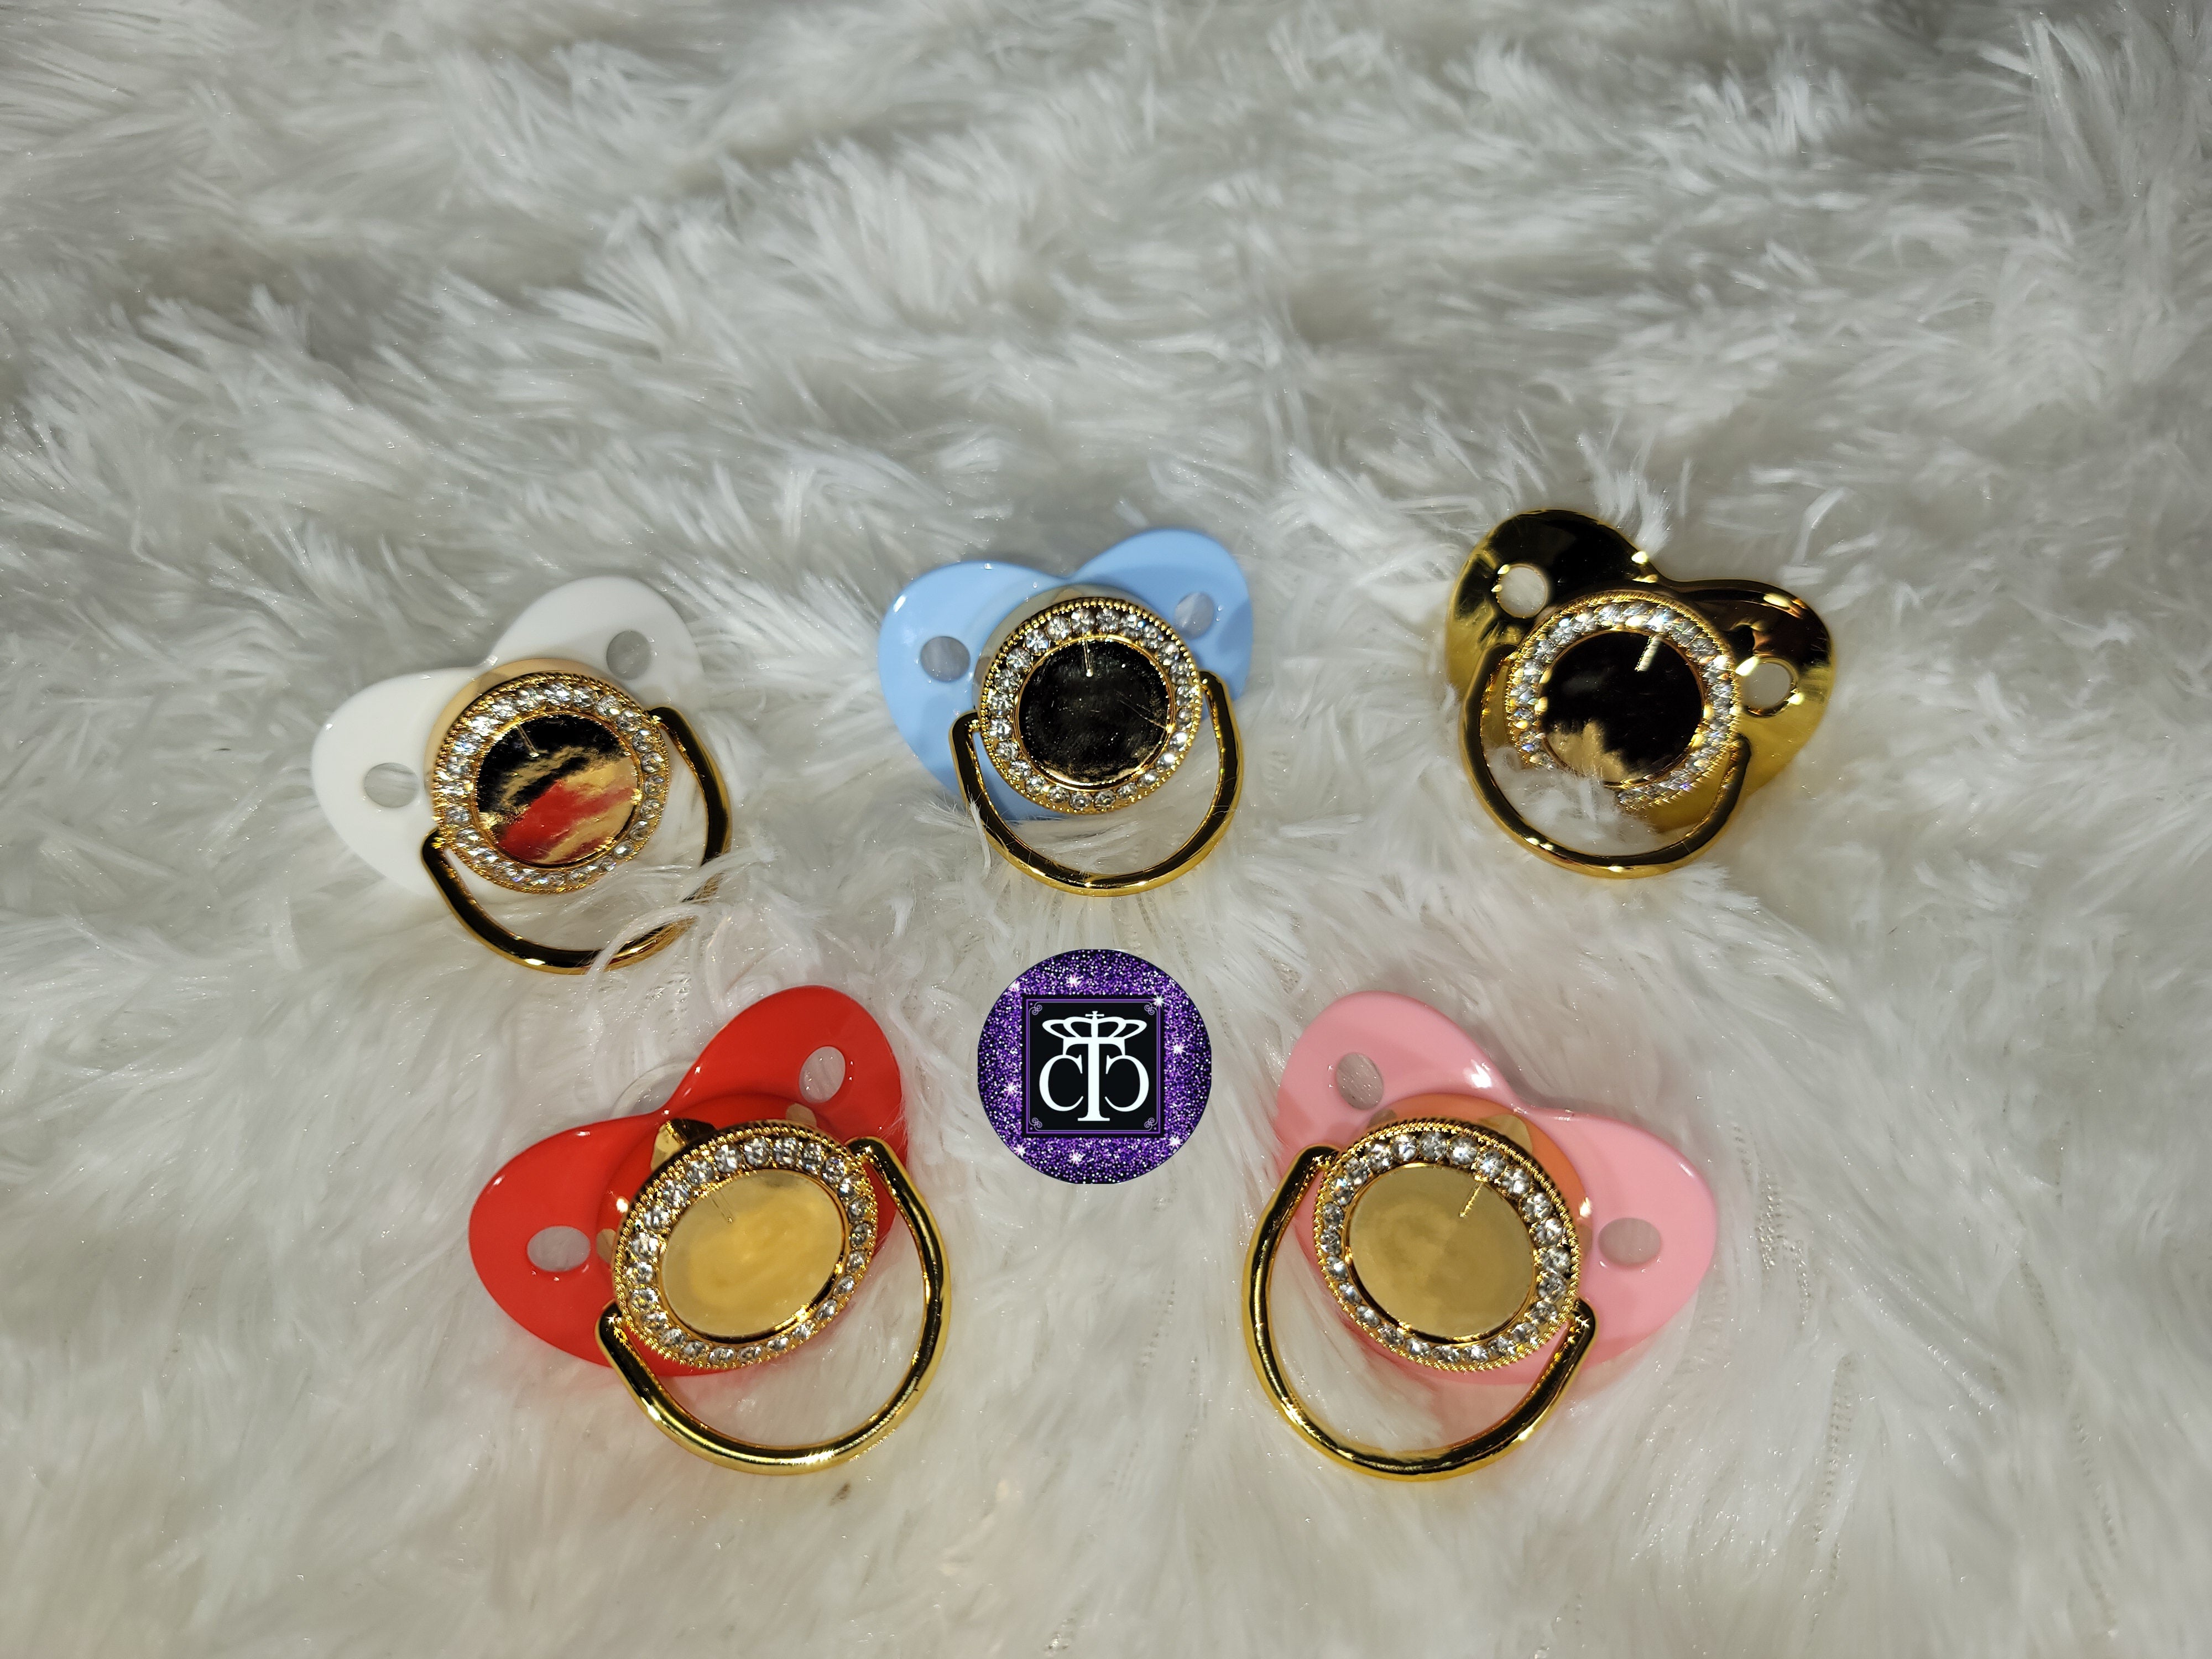 Bling Baby Pacifier